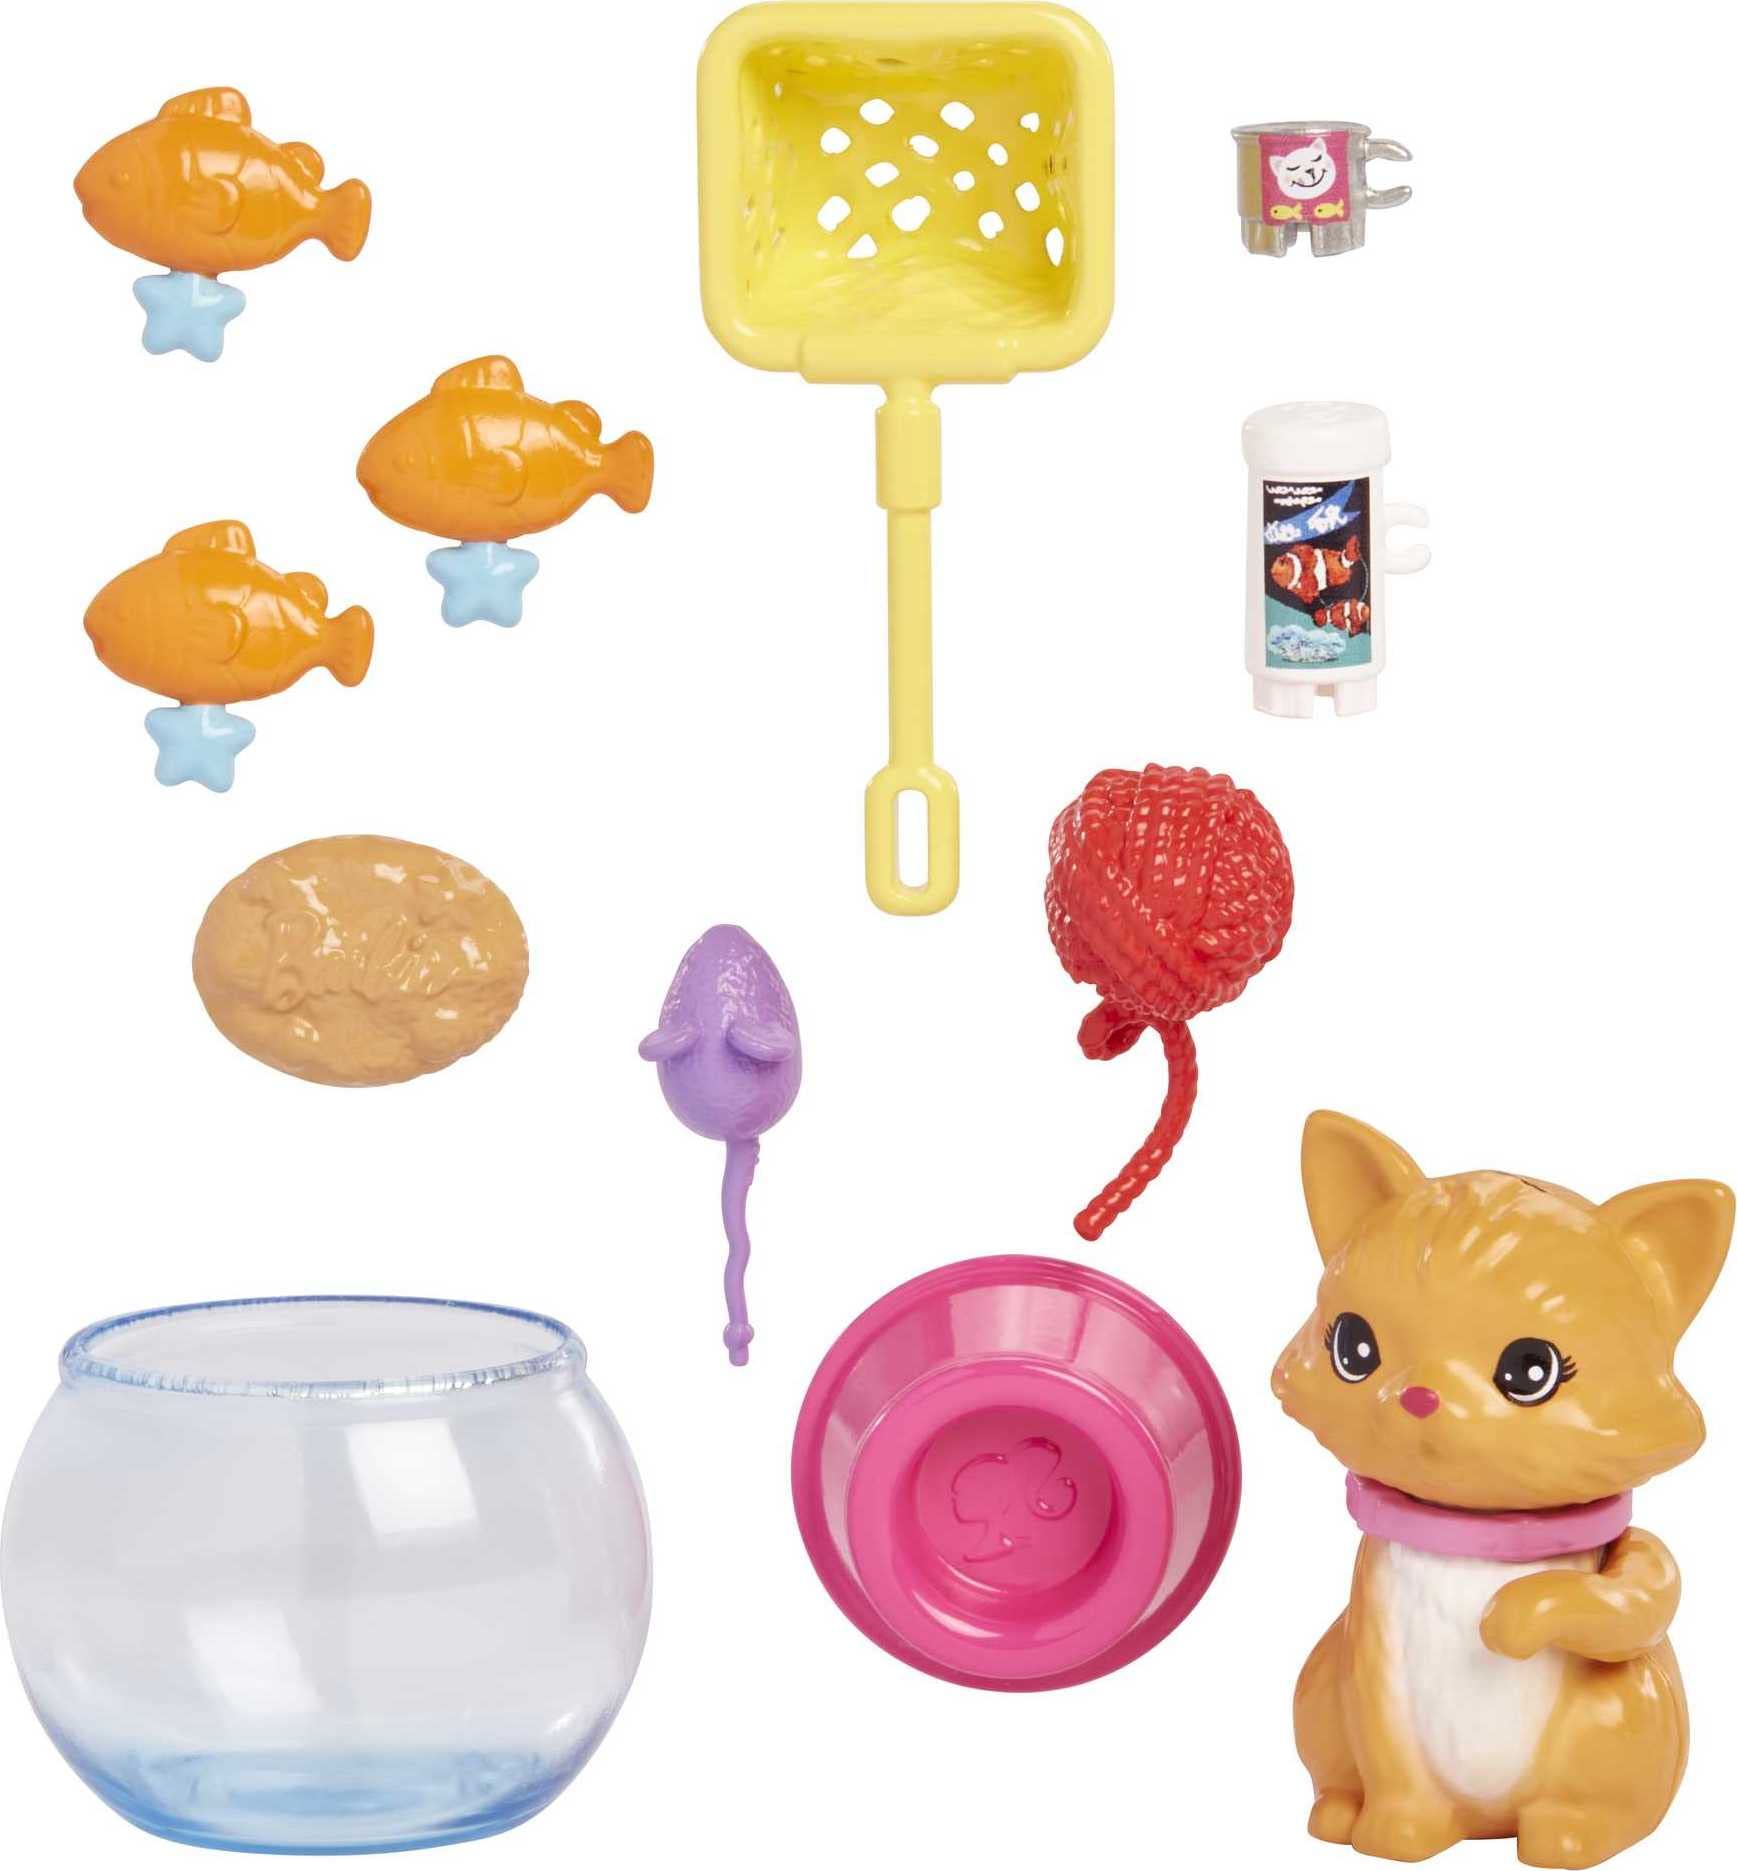 Barbie Interactive Pets & Accessories Sets: Kitty or Puppy Playset $5.83 + Free Shipping w/ Prime or on $35+